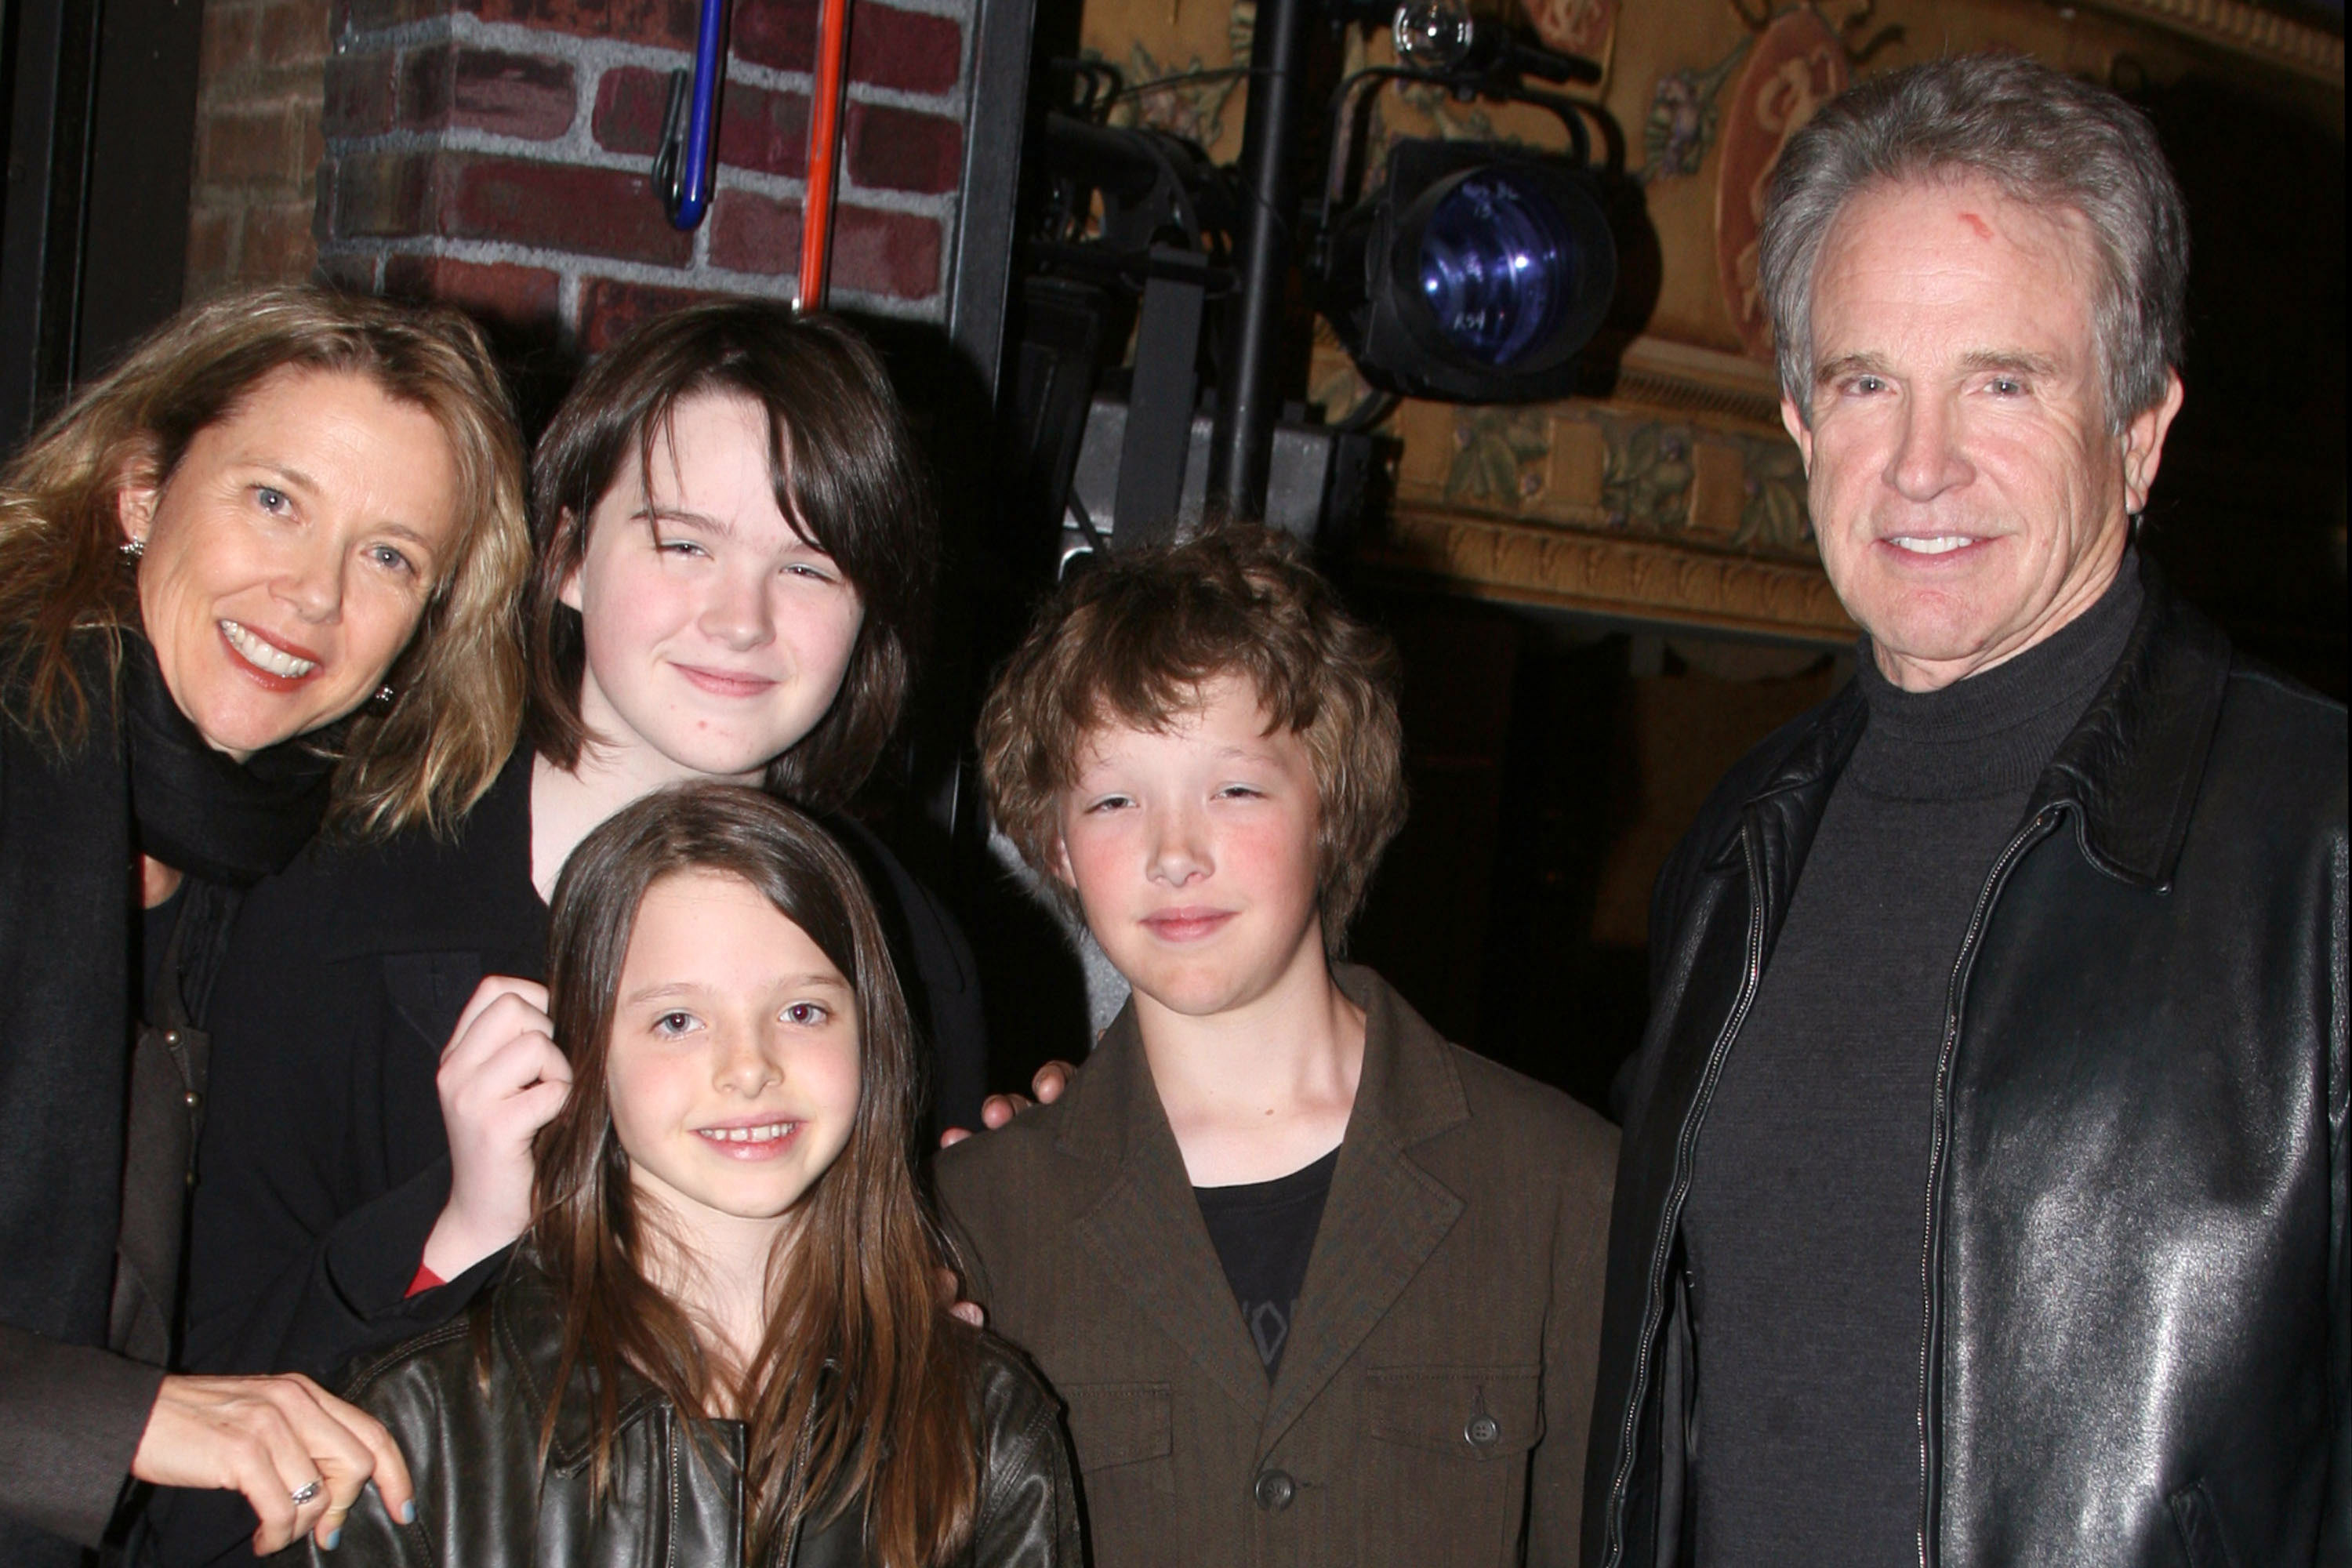 Annette Bening and Warren Beatty visit "Spring Awakening" with their children Kathlyn, Benjamin, and Isabel on April 6, 2022 | Source: Getty Images